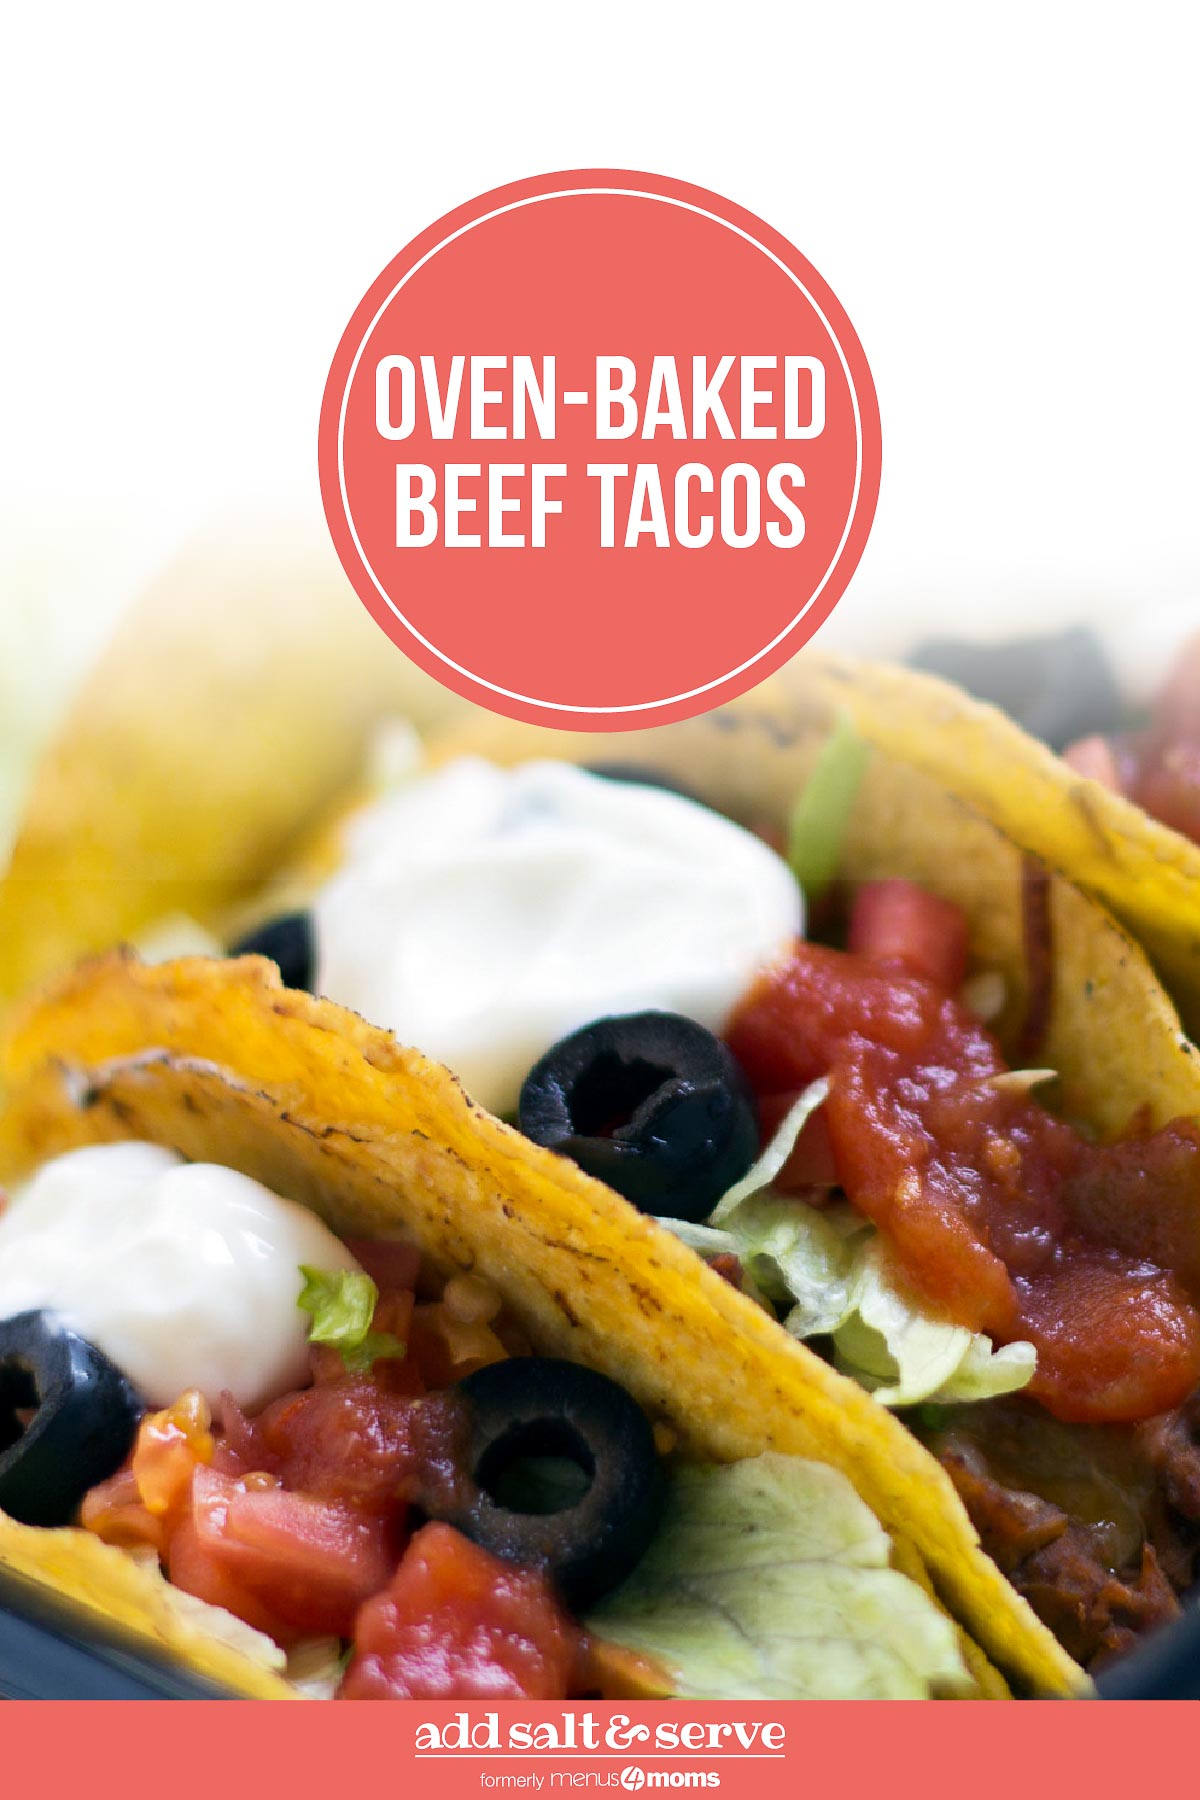 Hard-shell tacos with beef, lettuce, olives, salsa, and sour cream